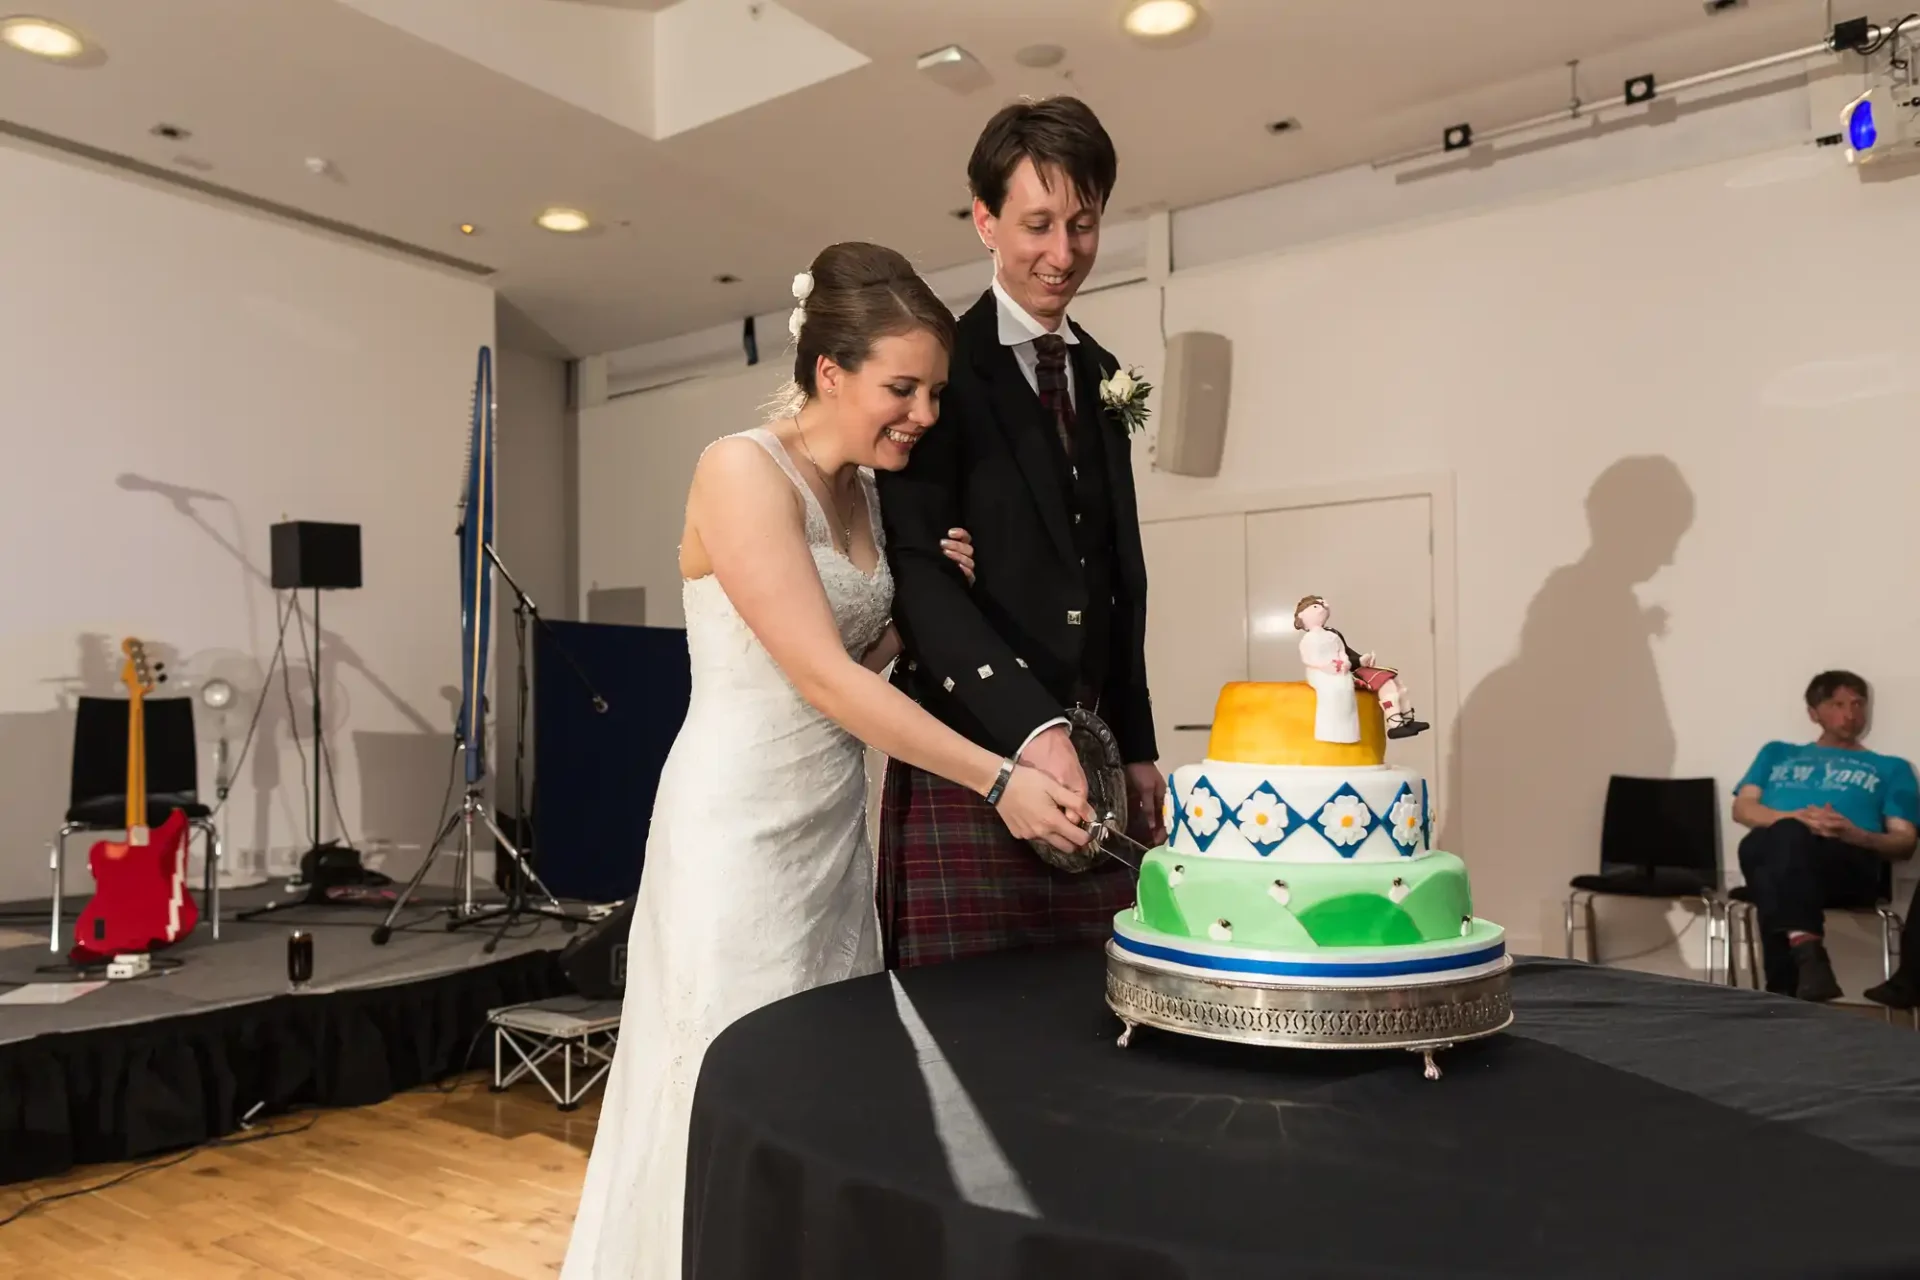 A bride and groom in formal attire cutting a three-tiered, colorful wedding cake in a room with a stage and musical equipment in the background.